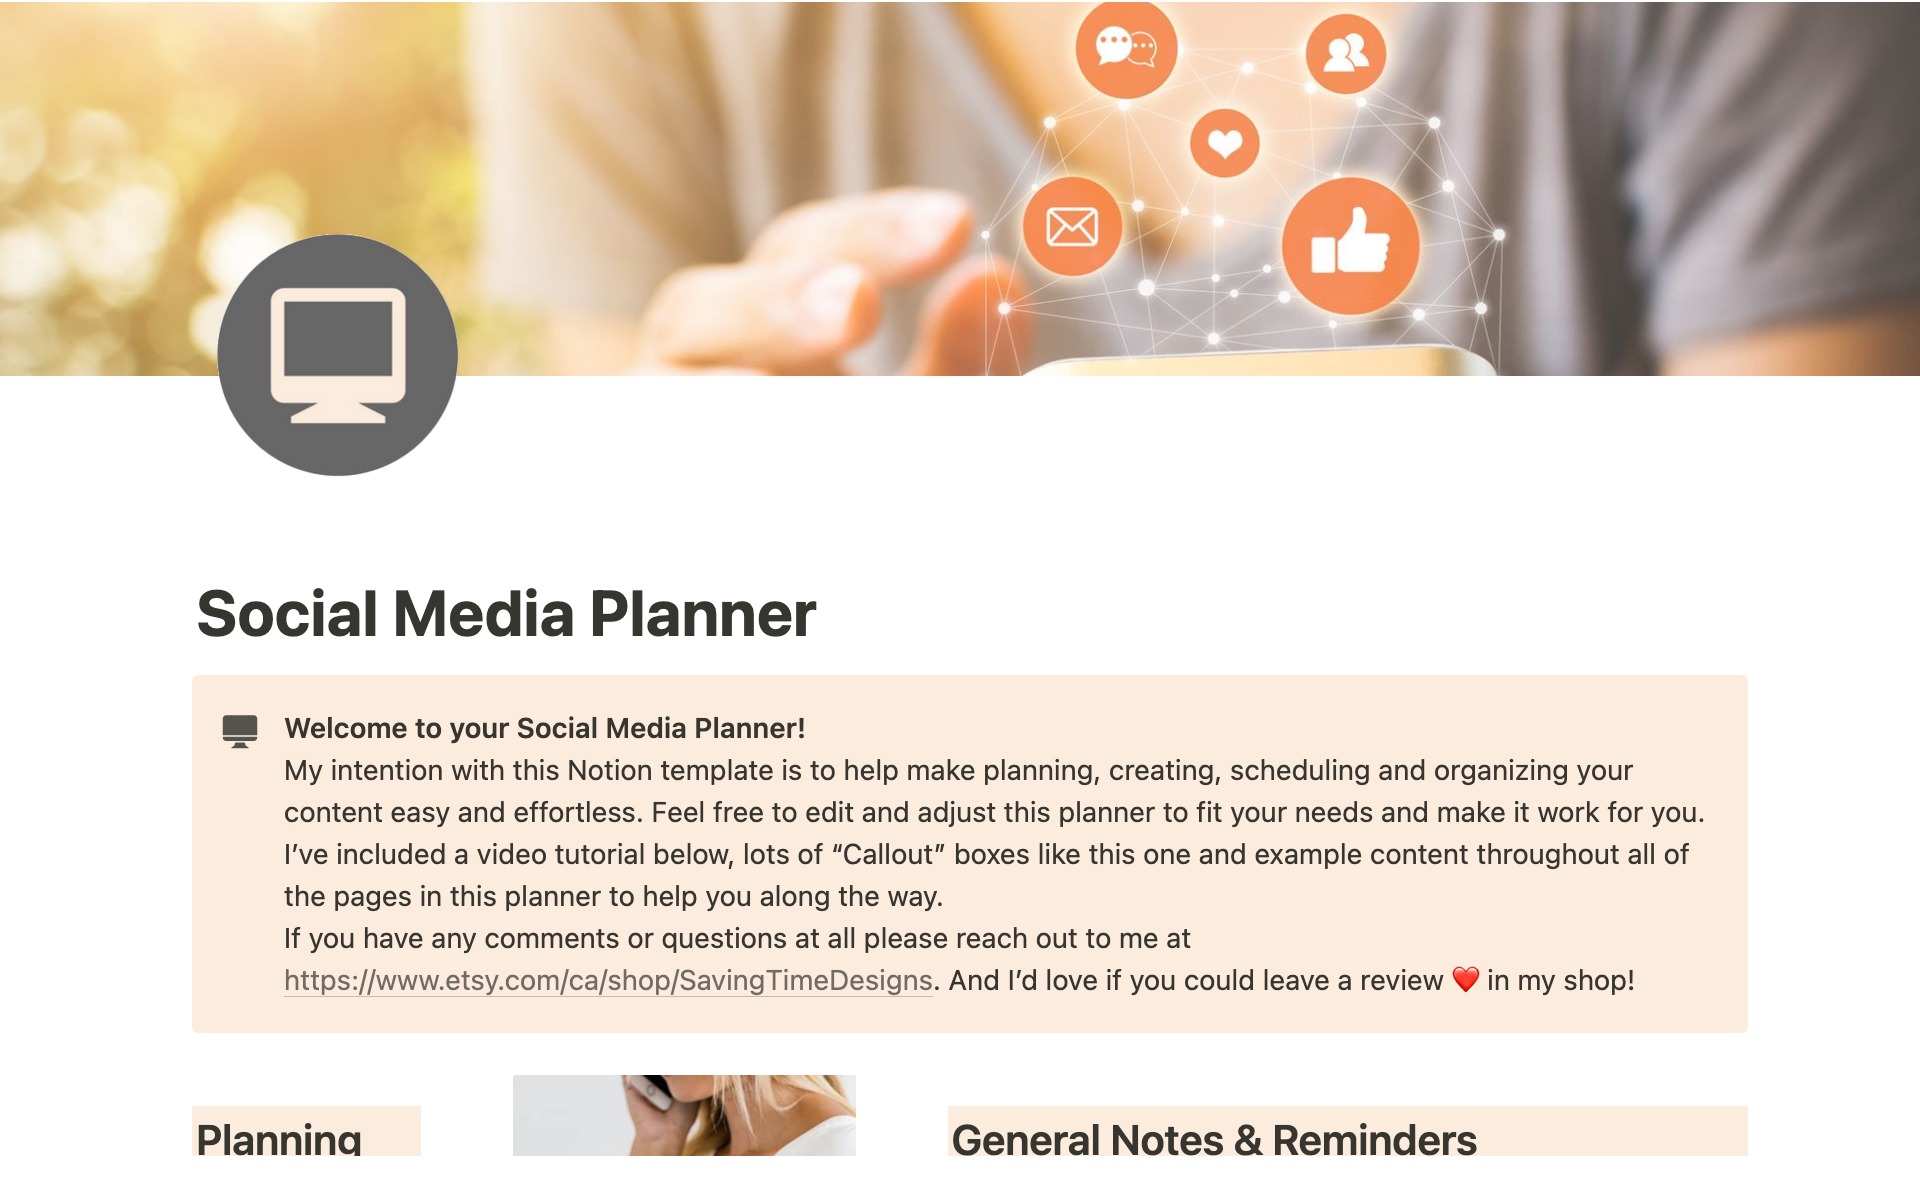 Helps users plan, create, schedule and organize their social media and content across 7 platforms